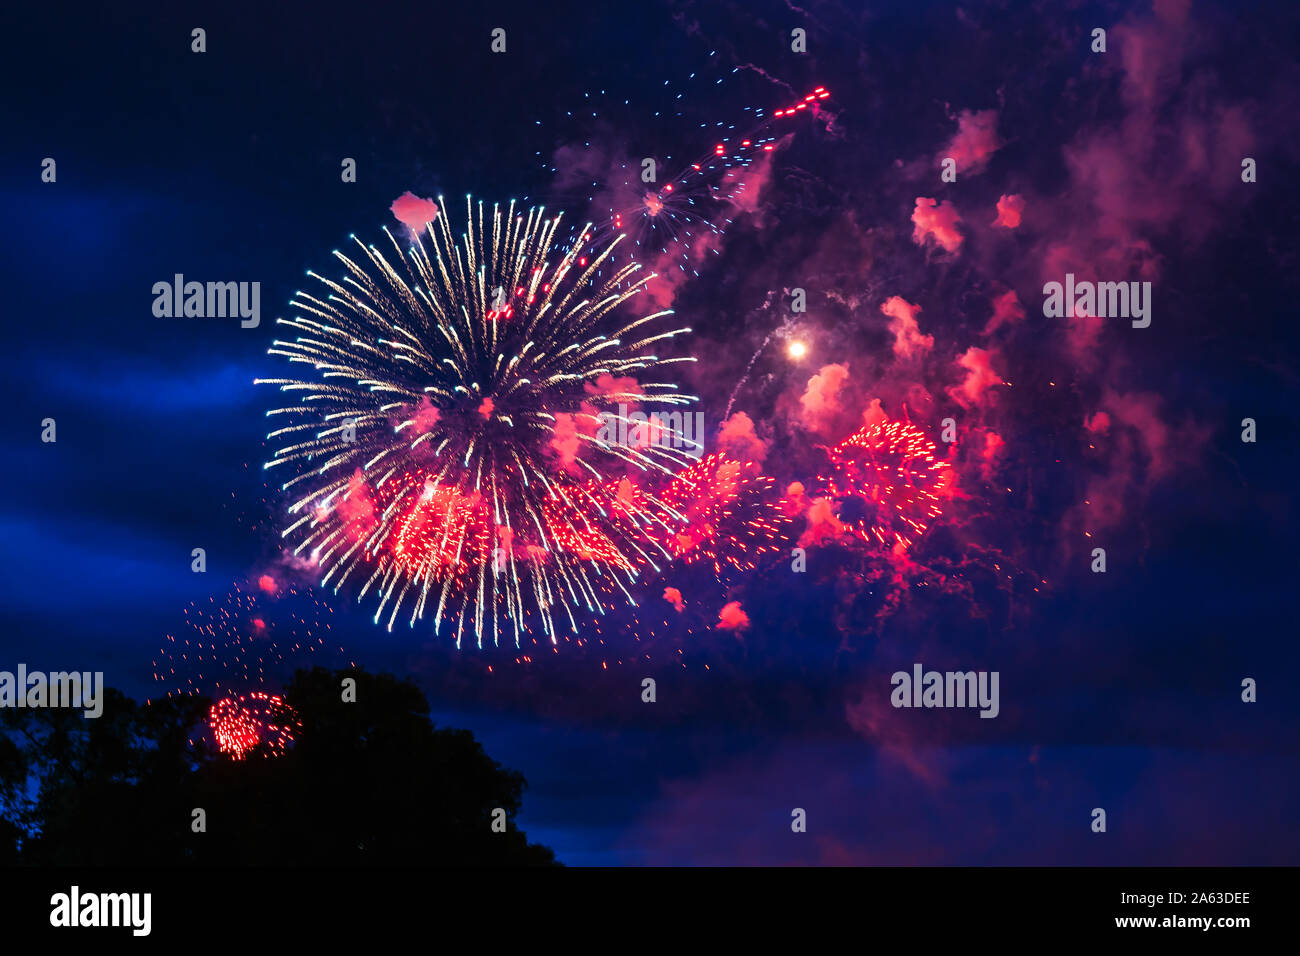 Inexpensive fireworks over the city red, pink and white. Bright and shiny. For any purpose. Celebration concept. Stock Photo